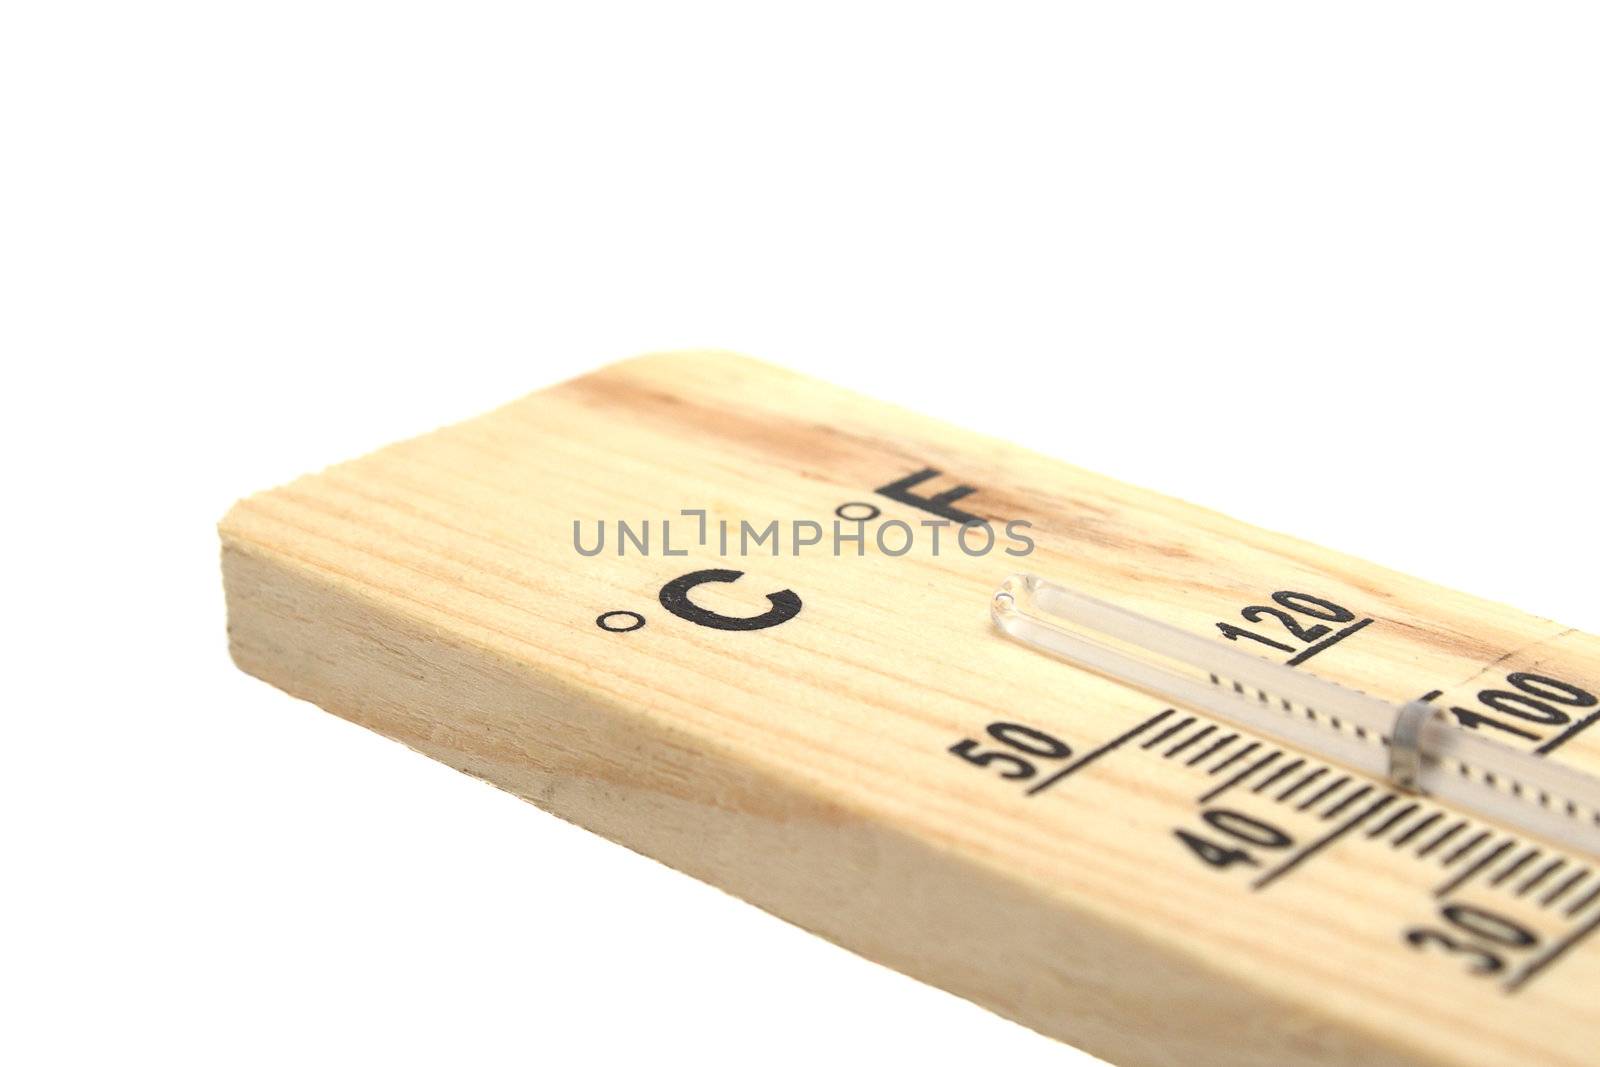 Wooden thermometer on white background by pulen